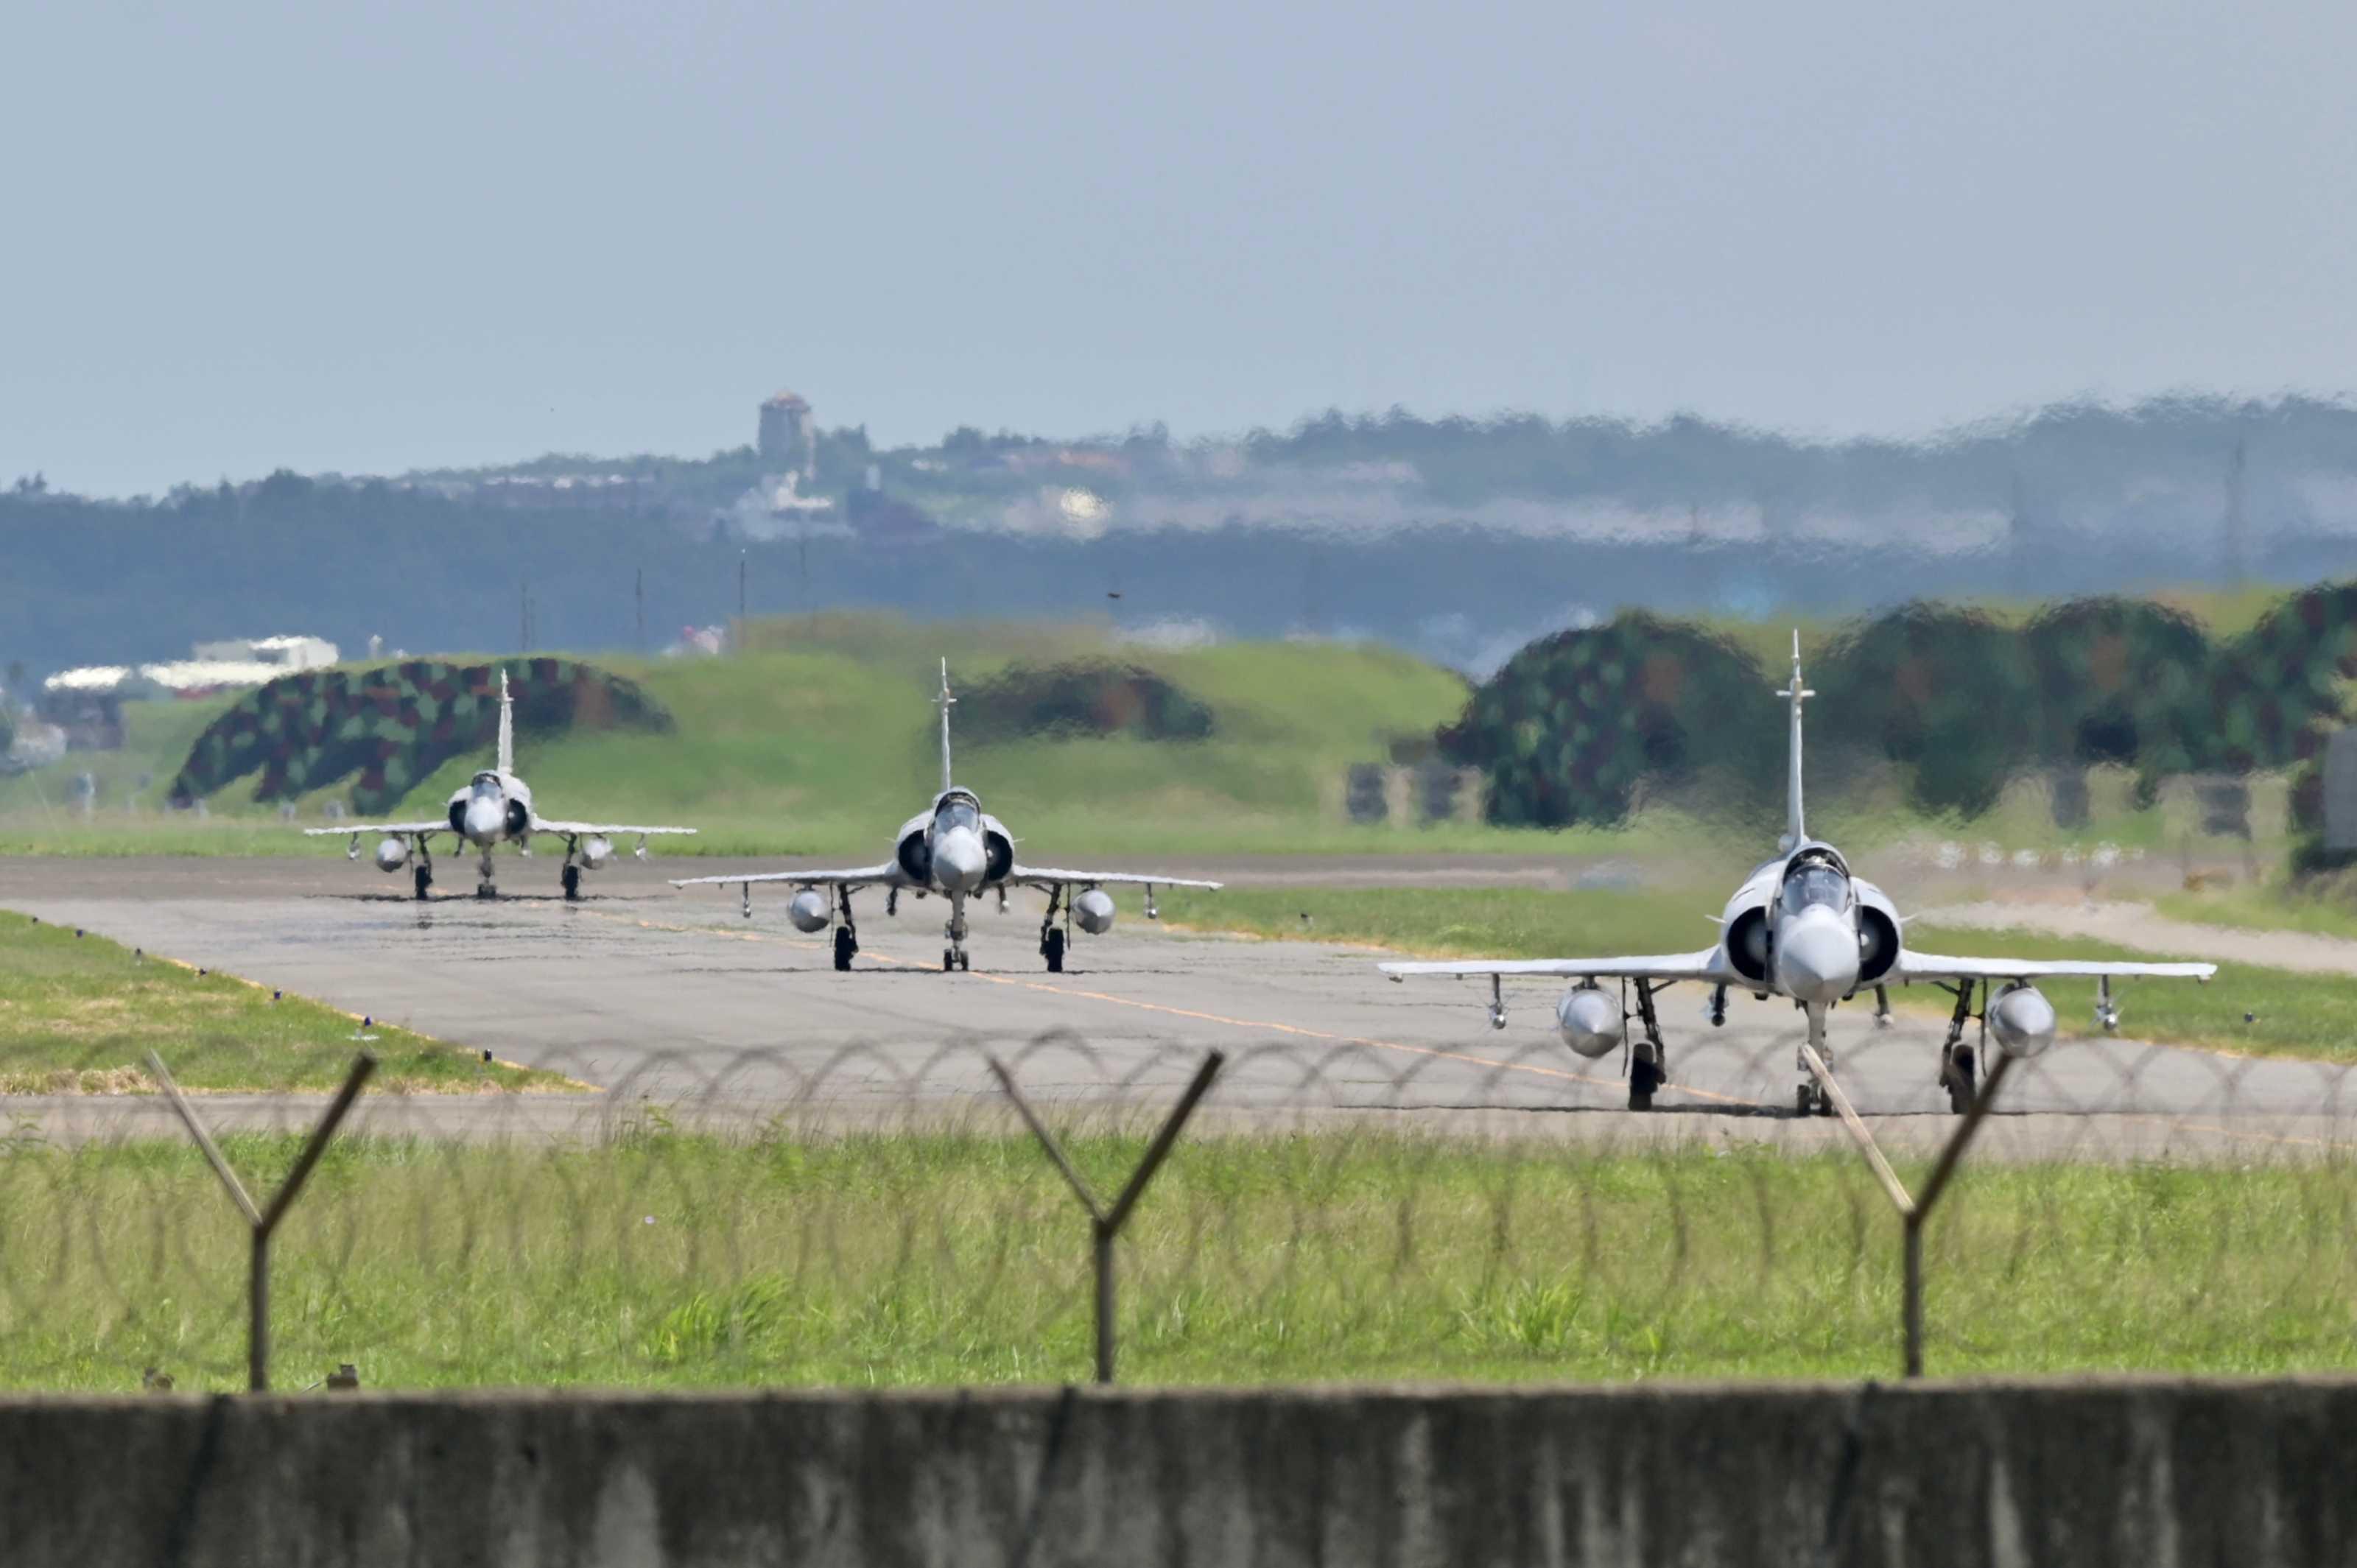 Three French-made Mirage 2000 fighter jets taxi on a runway in front of a hangar at the Hsinchu Air Base in Hsinchu on Aug 5, 2022. Photo: AFP 